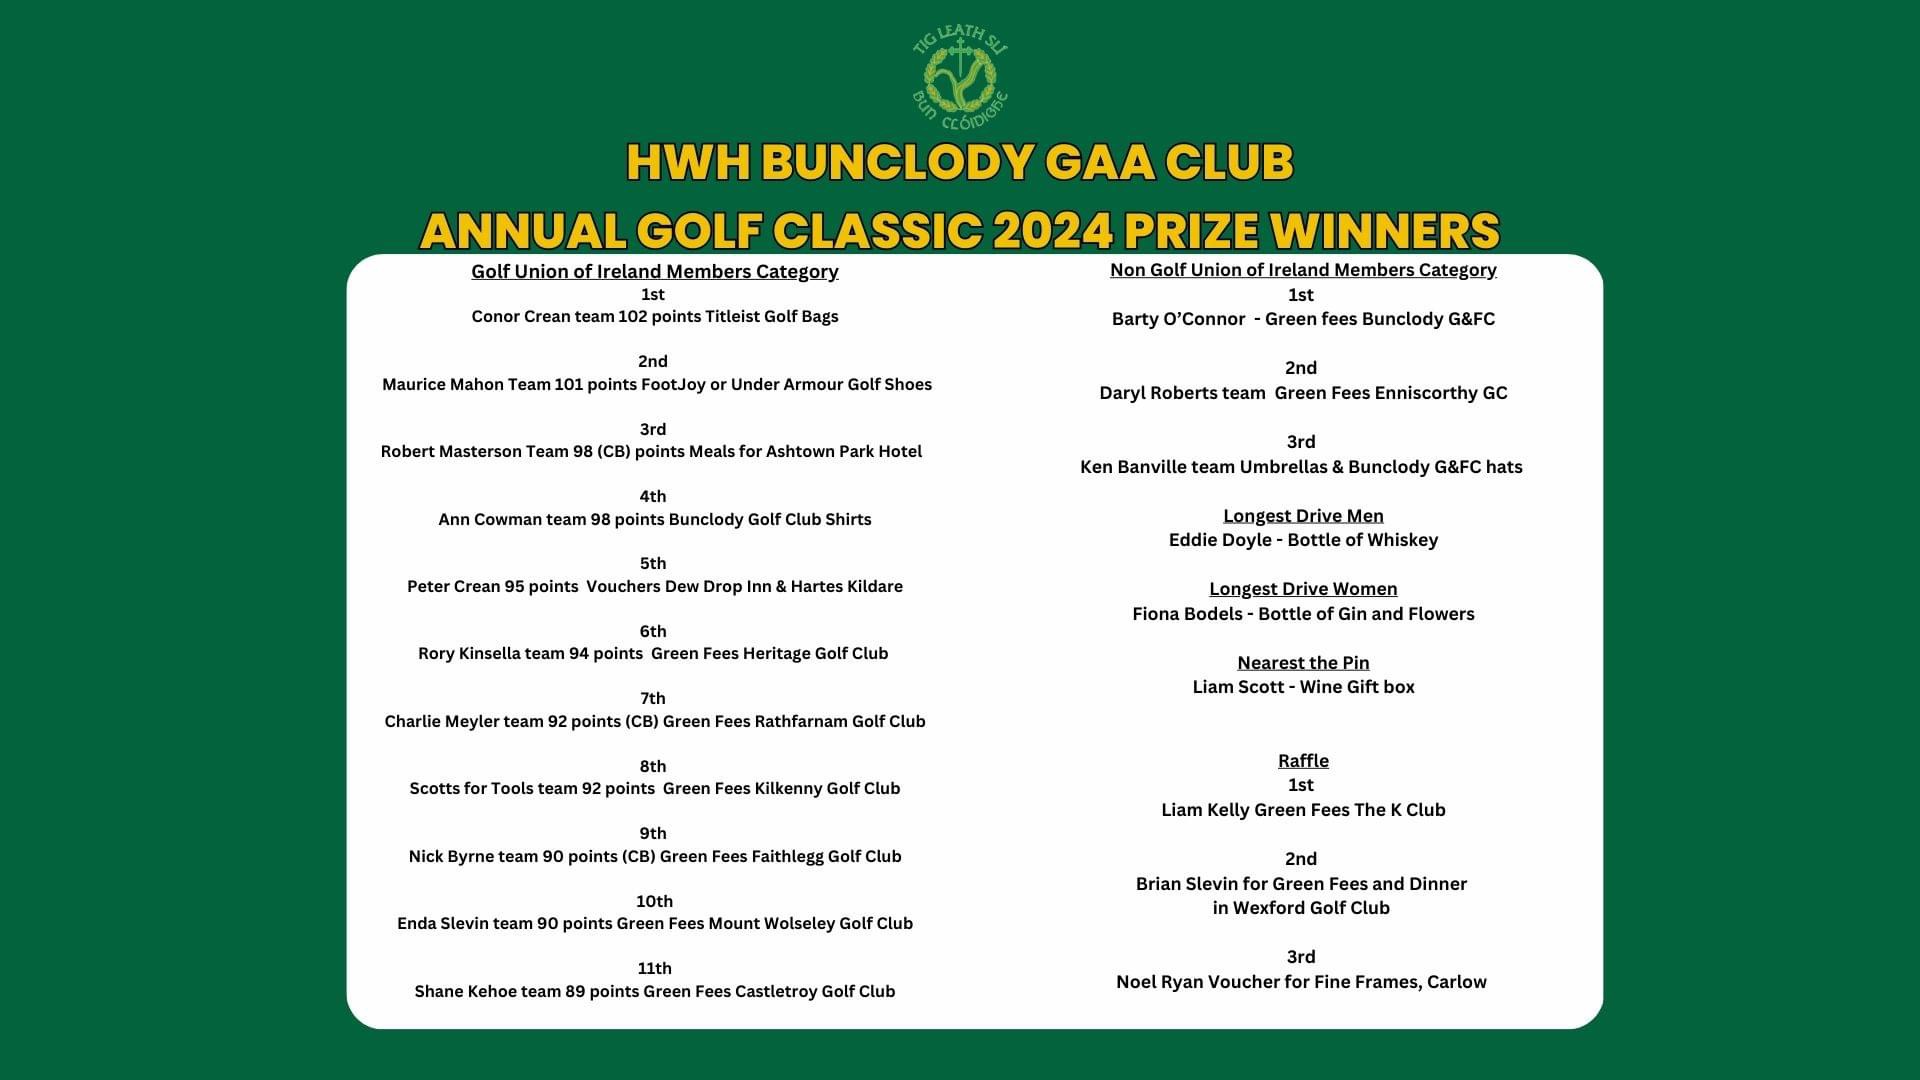 Half Way House Bunclody – Annual Golf Classic 2024 Prize Winners